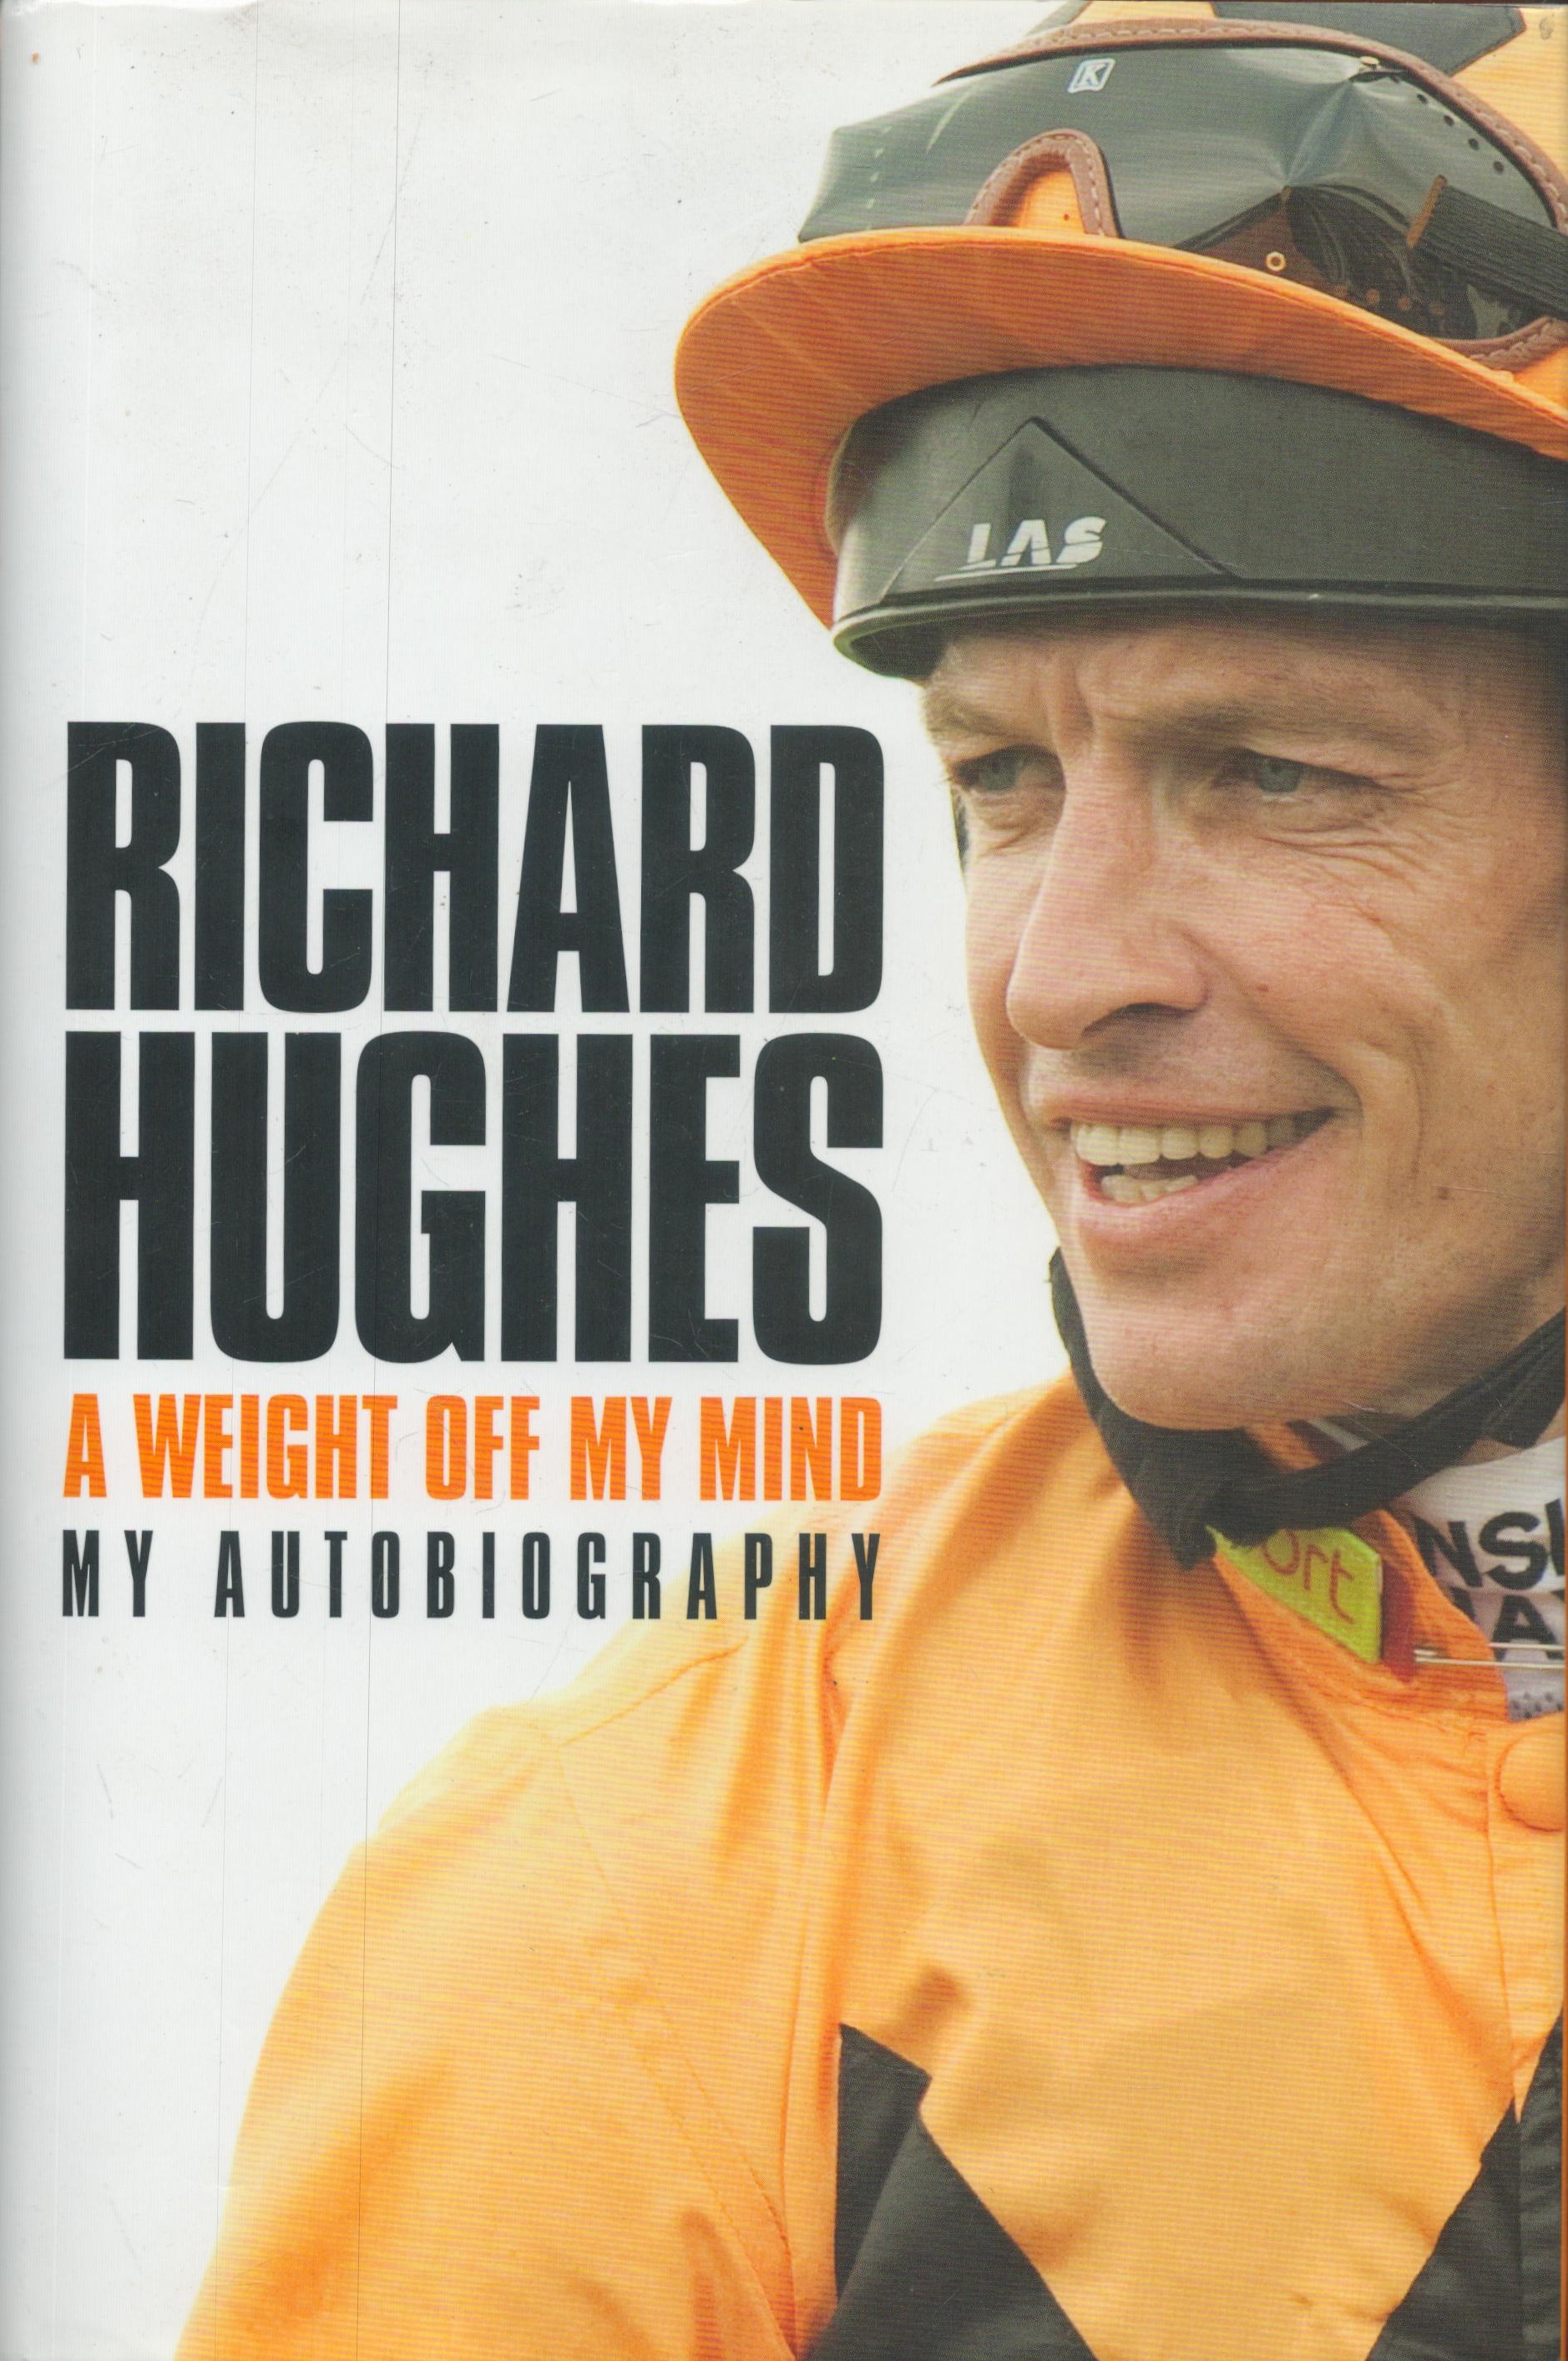 Richard Hughes Signed Book - A Weight off my Mind - My Autobiography by Richard Hughes 2012 hardback